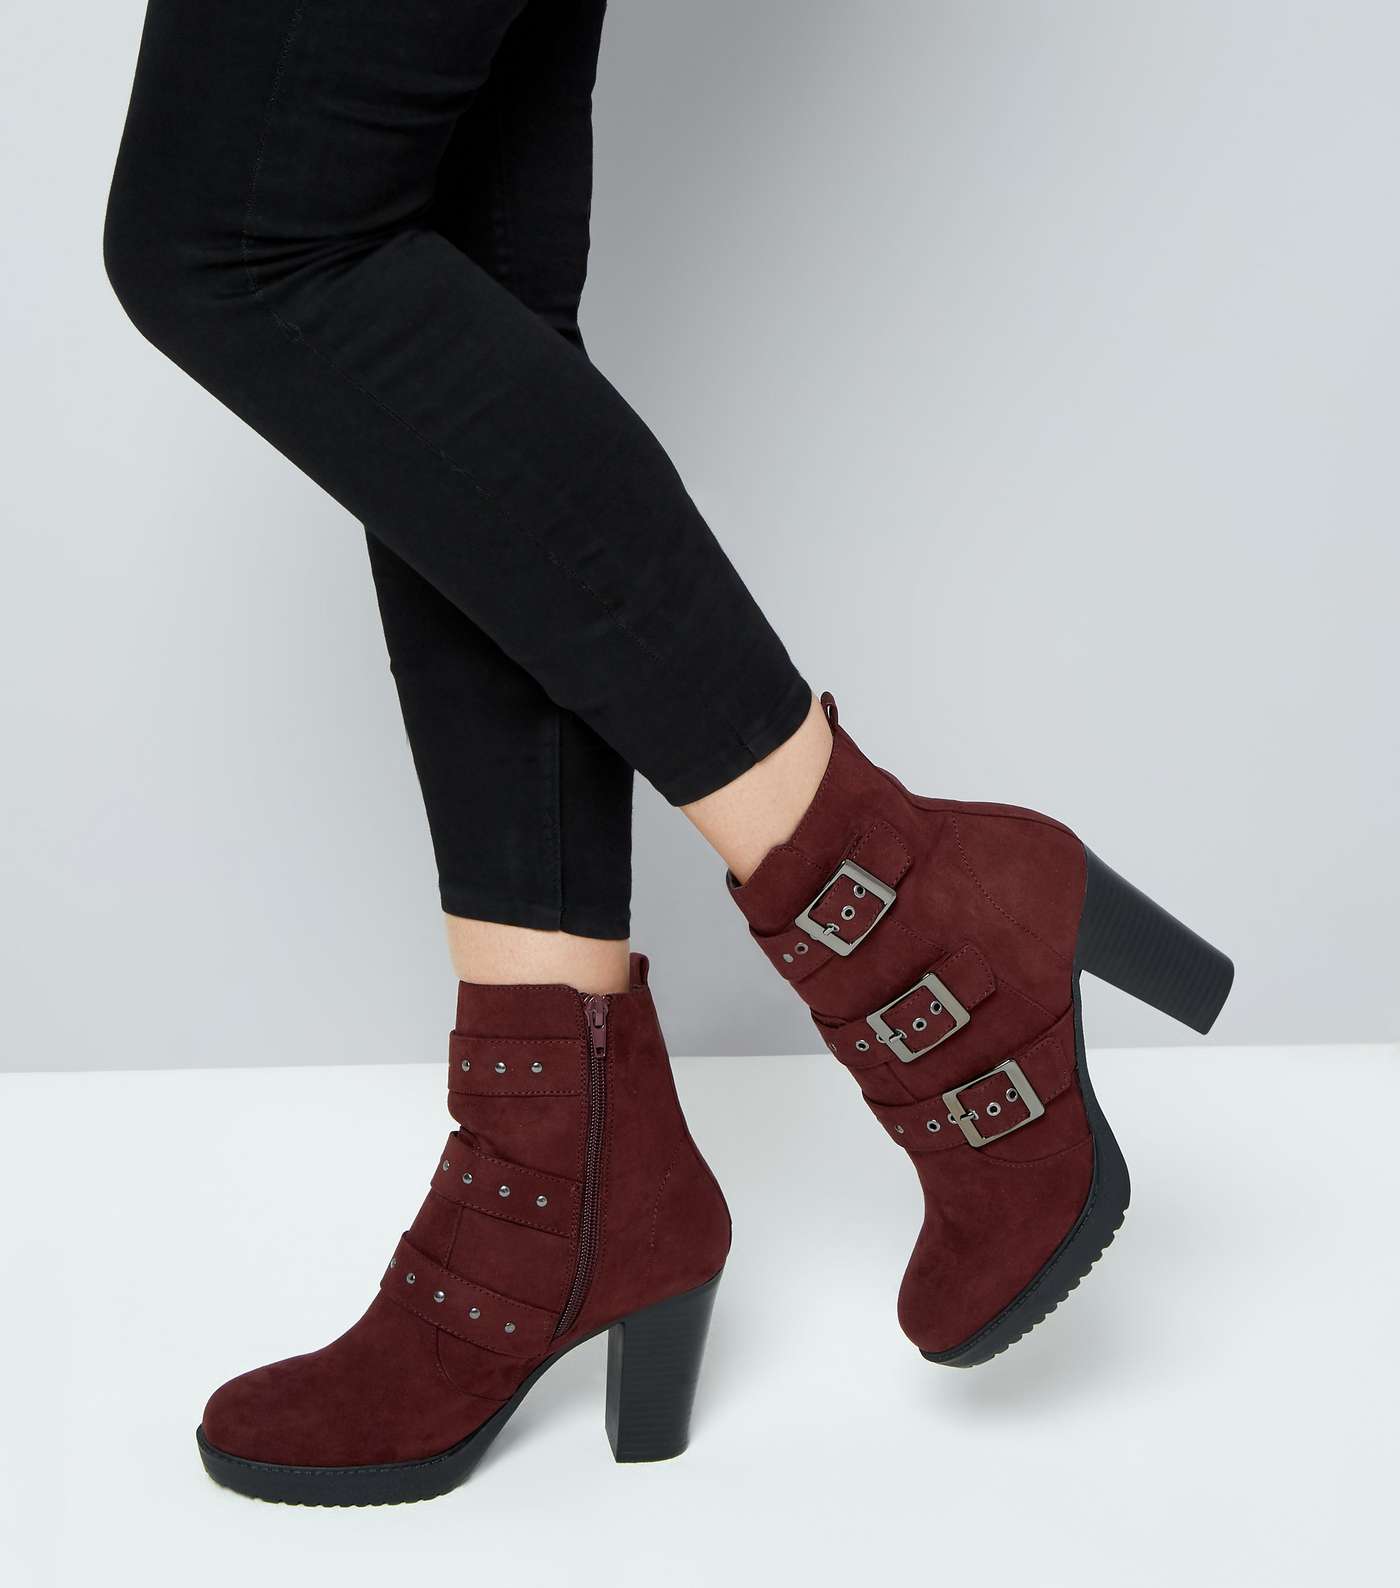 Burgundy Suedette Stud Buckle Heeled Ankle Boots Image 3